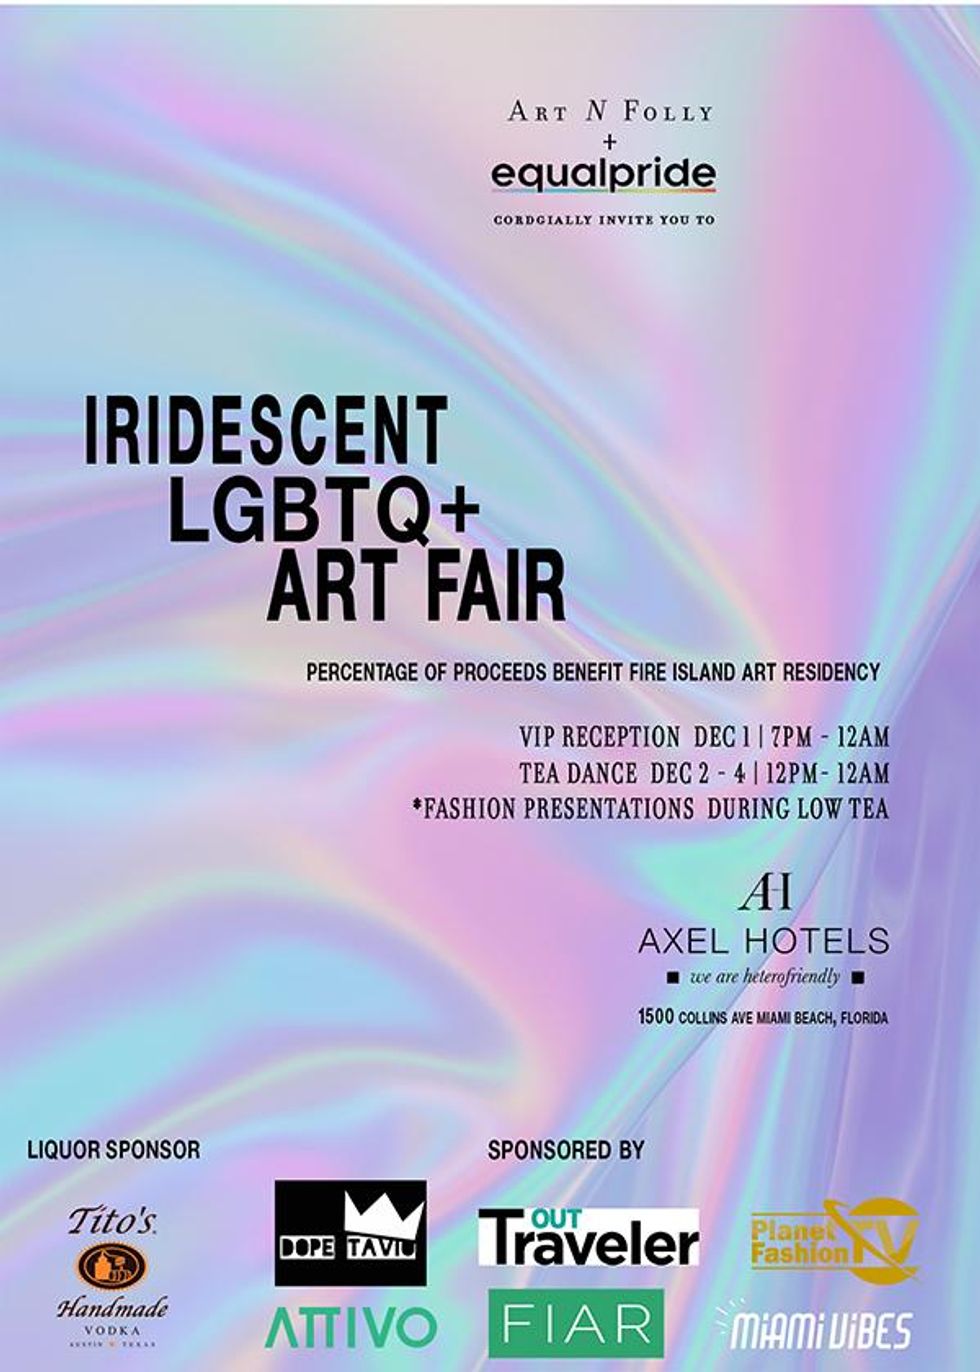 The LGBTQ+ Art Fair takes place December 2-4, 2022, at the renowned Axel Beach Hotel in Miami Beach, Florida